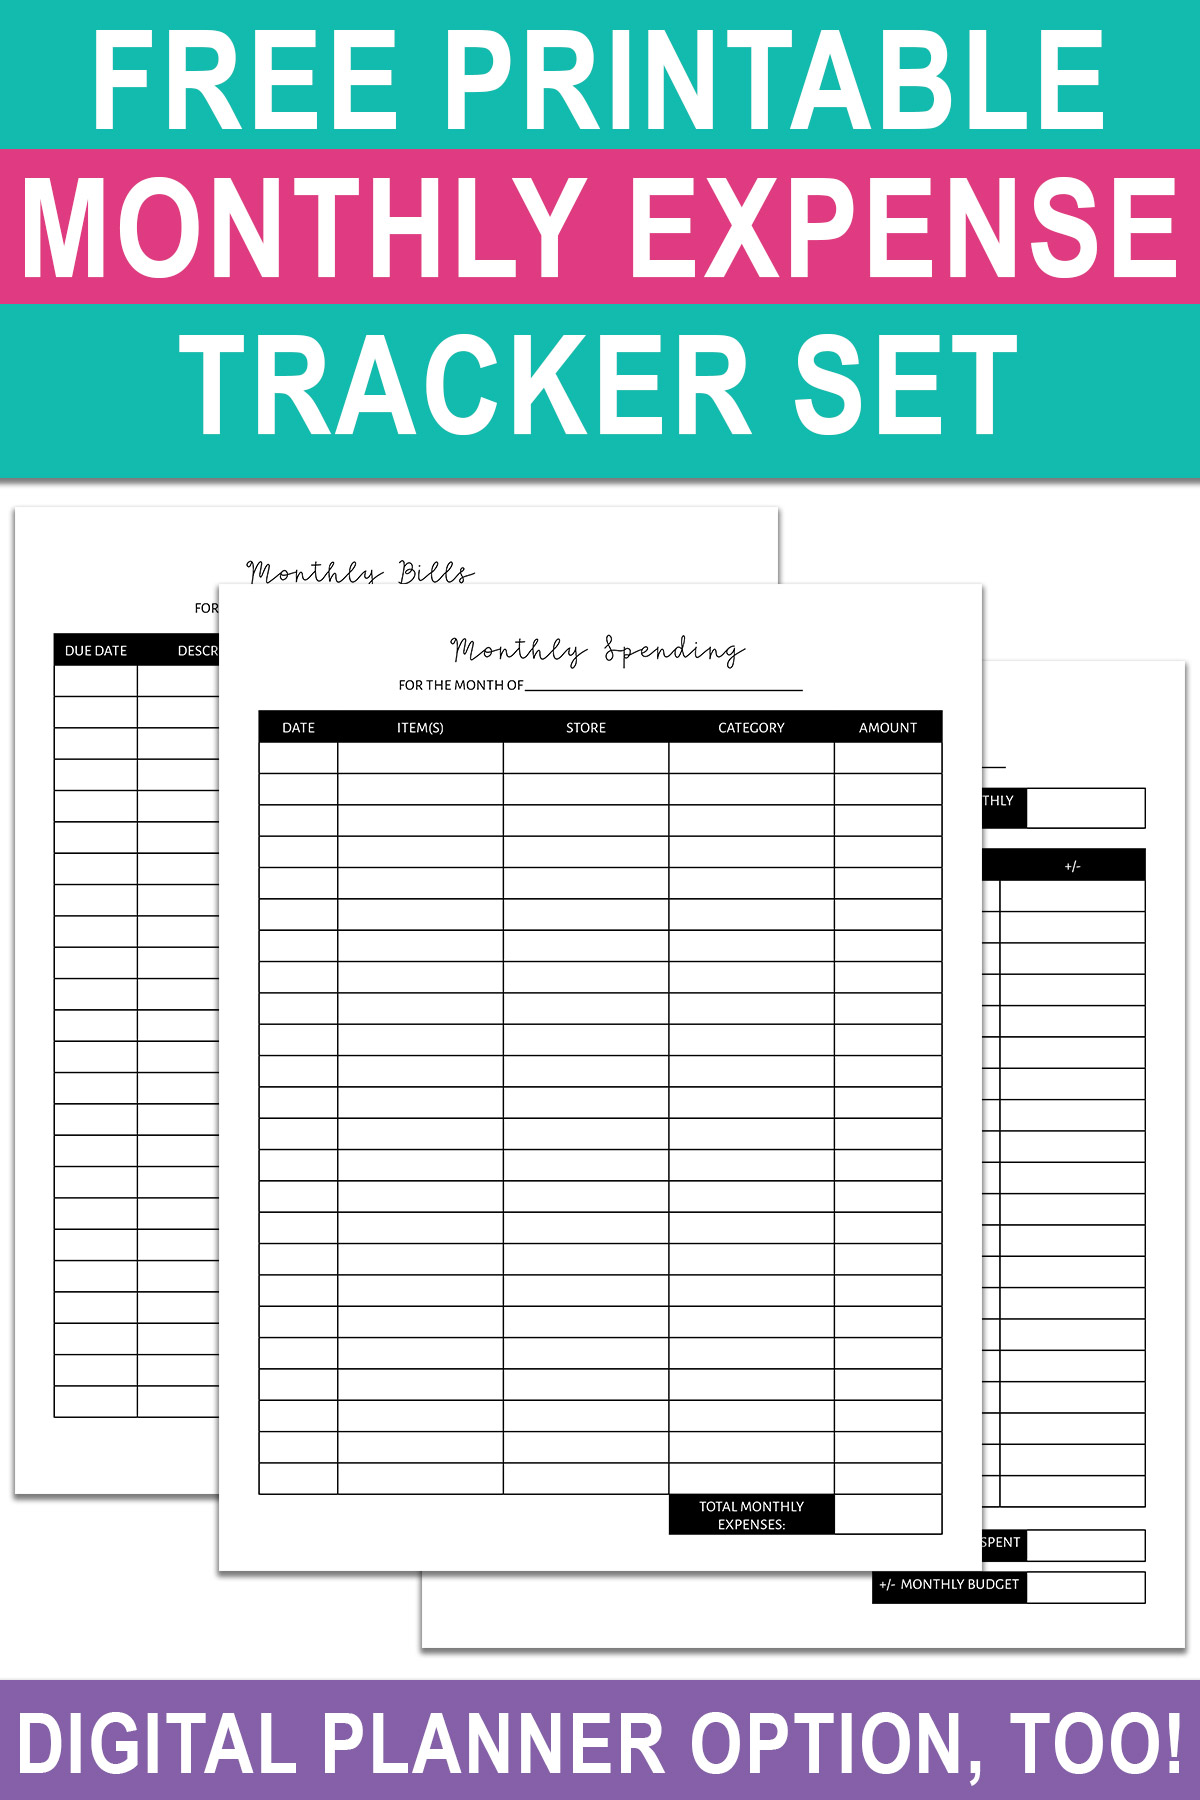 At the top it says free printable monthly expense tracker set. Below that, it has an image of the 3 monthly expense trackers available for free in this post. At the bottom it says digital planner option, too!